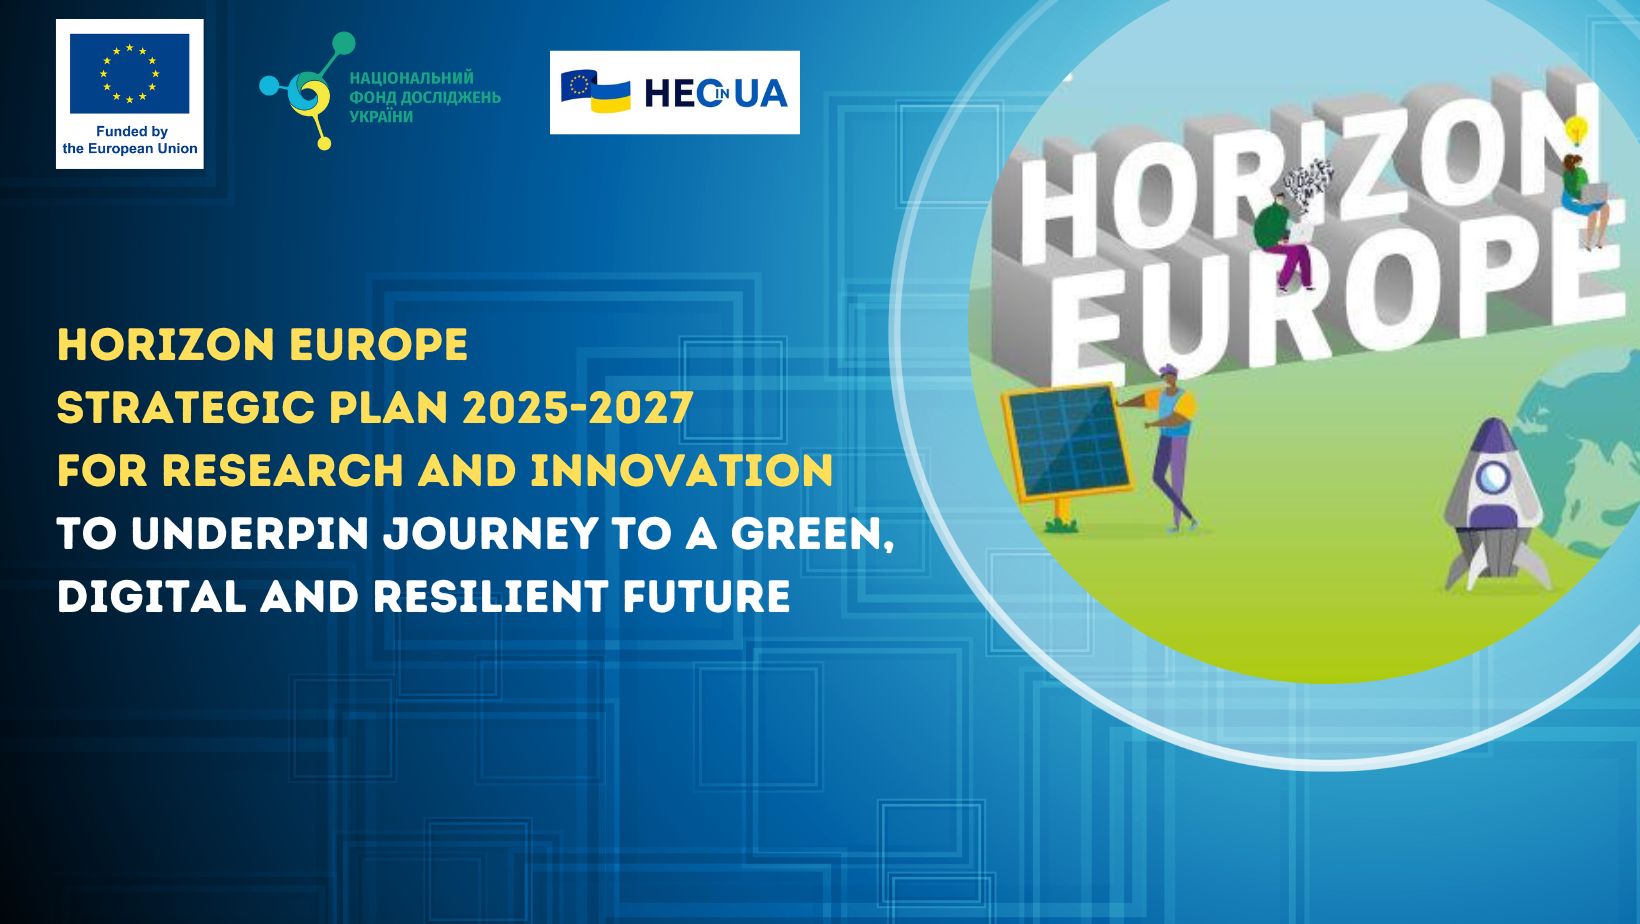 Horizon Europe strategic plan 2025-2027 for research and innovation to underpin journey to a green, digital and resilient future